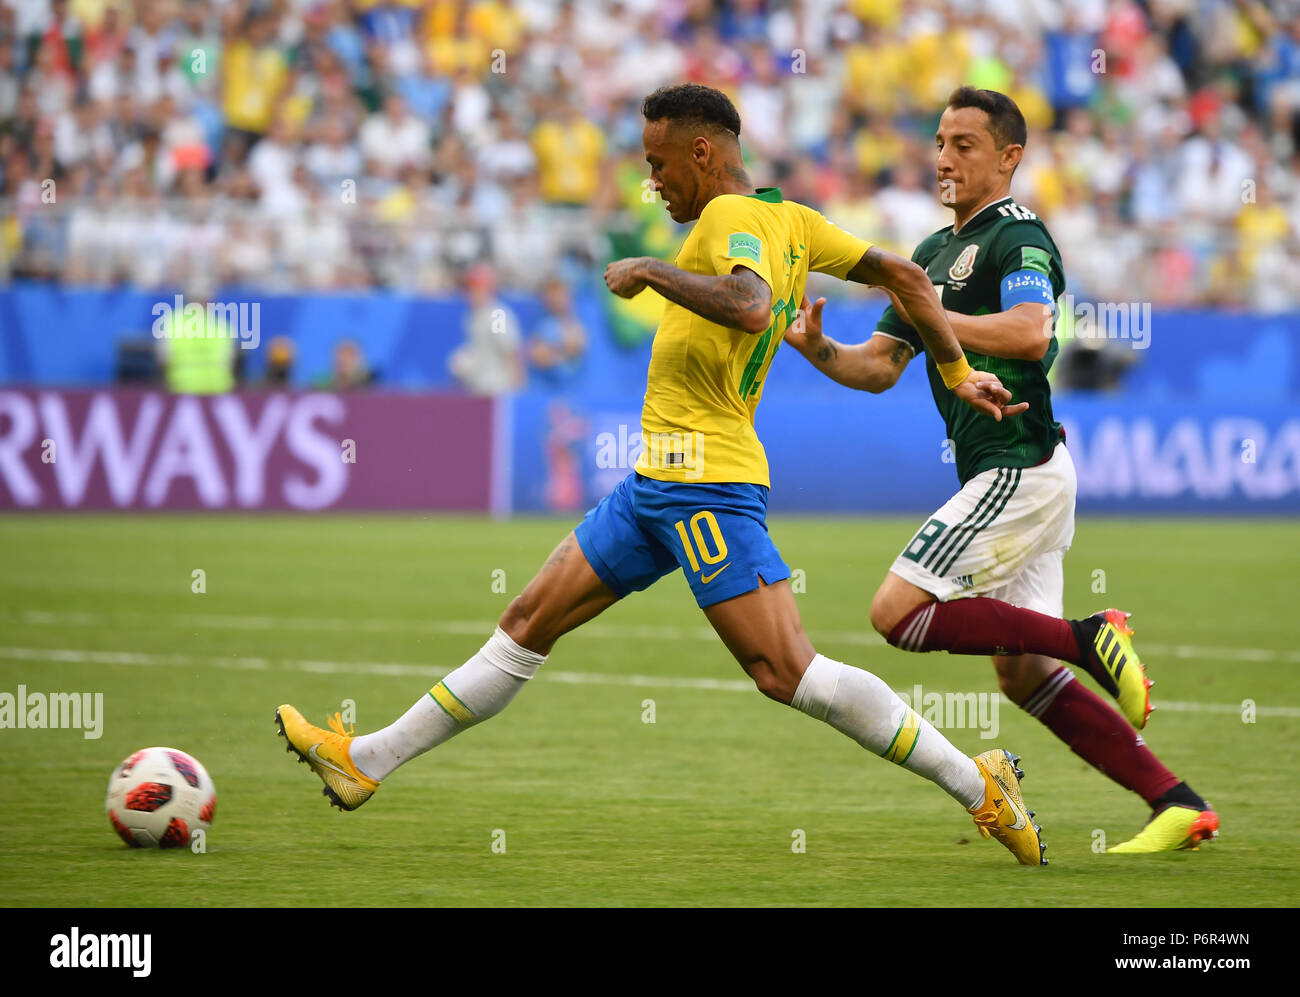 Samara, Russia. 2nd July, 2018. Neymar (L) of Brazil vies with Andres Guardado of Mexico during the 2018 FIFA World Cup round of 16 match between Brazil and Mexico in Samara, Russia, July 2, 2018. Brazil won 2-0 and advanced to the quarter-final. Credit: Li Ga/Xinhua/Alamy Live News Stock Photo